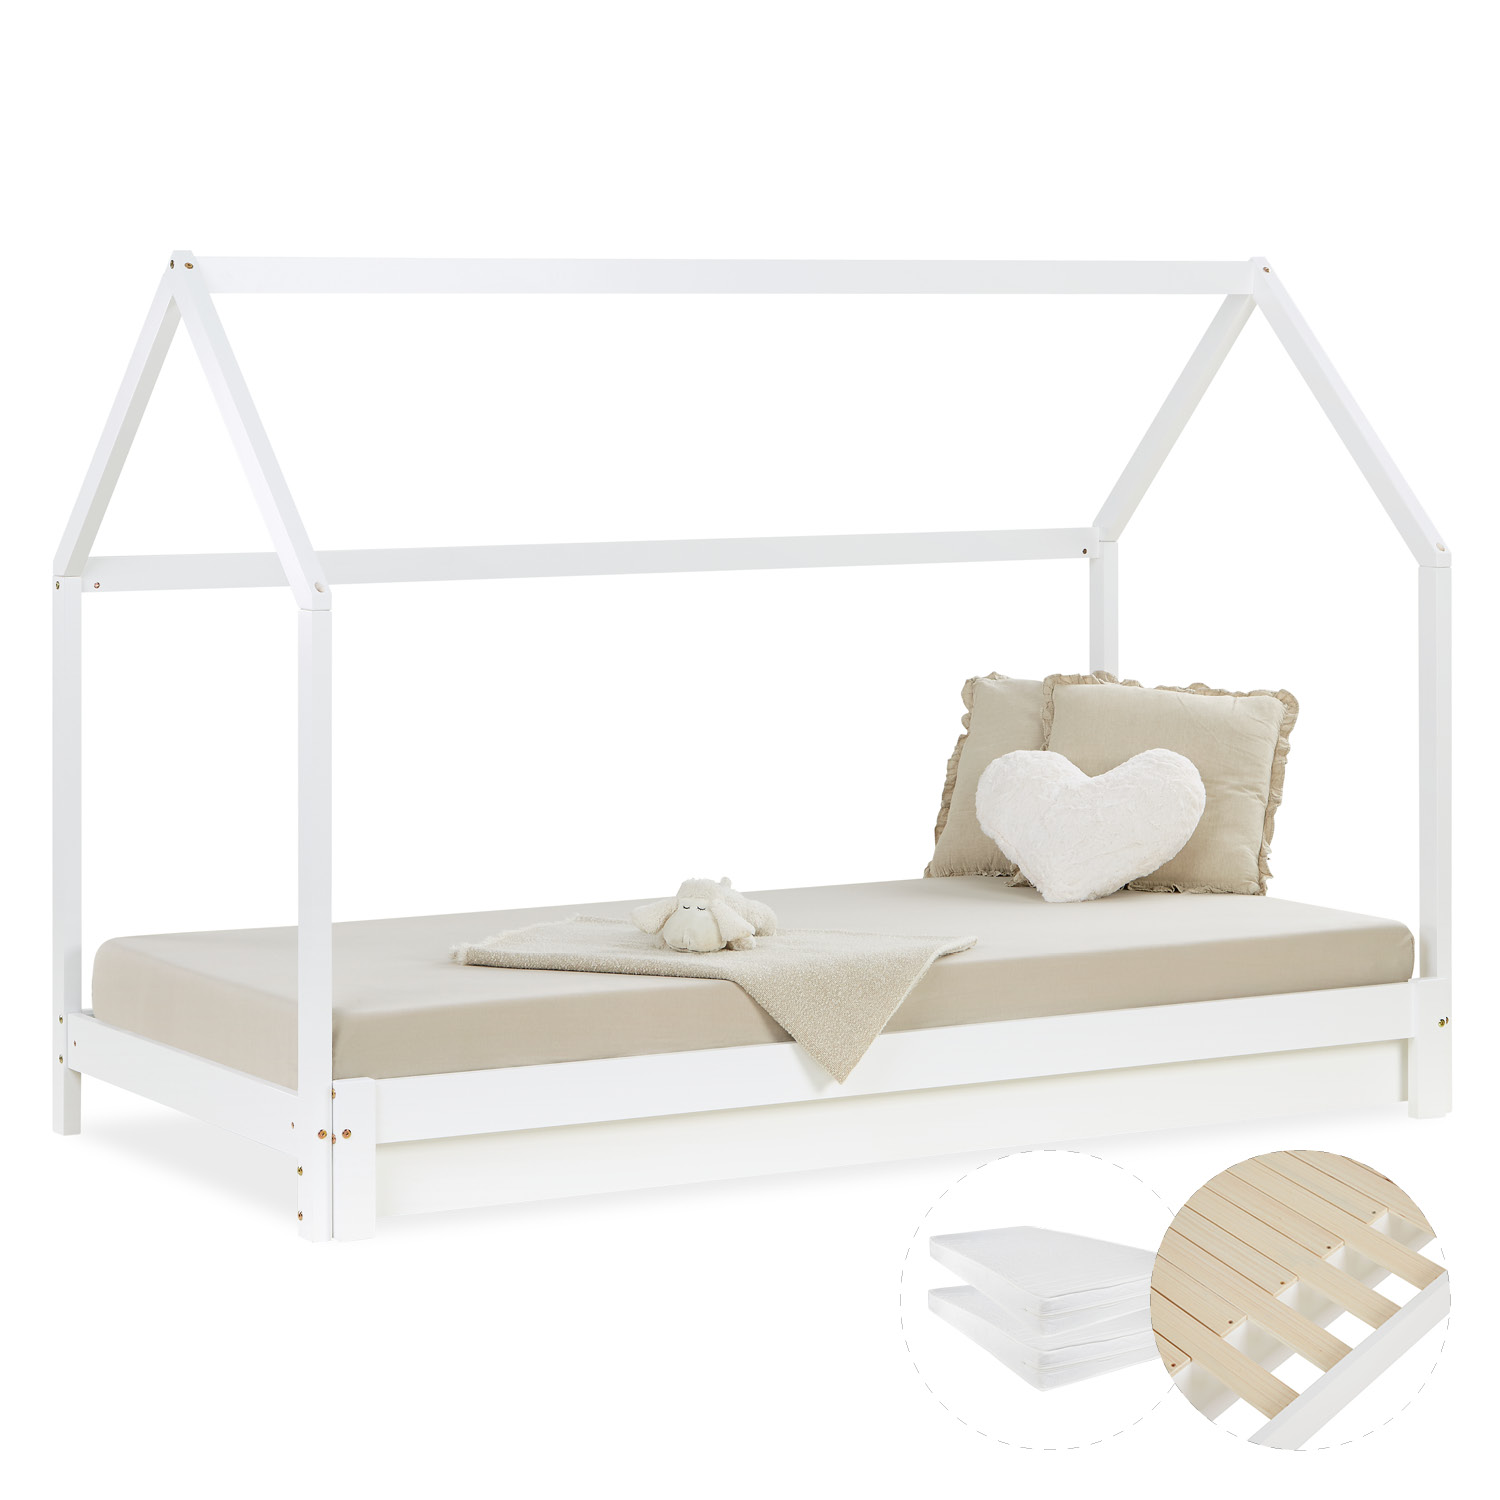 Children's Bed with Pull Out Bed 90x200 cm House Bed Mattress Bed Slats Treehouse Bed Children's Single Bed Wooden Frame White Trundle